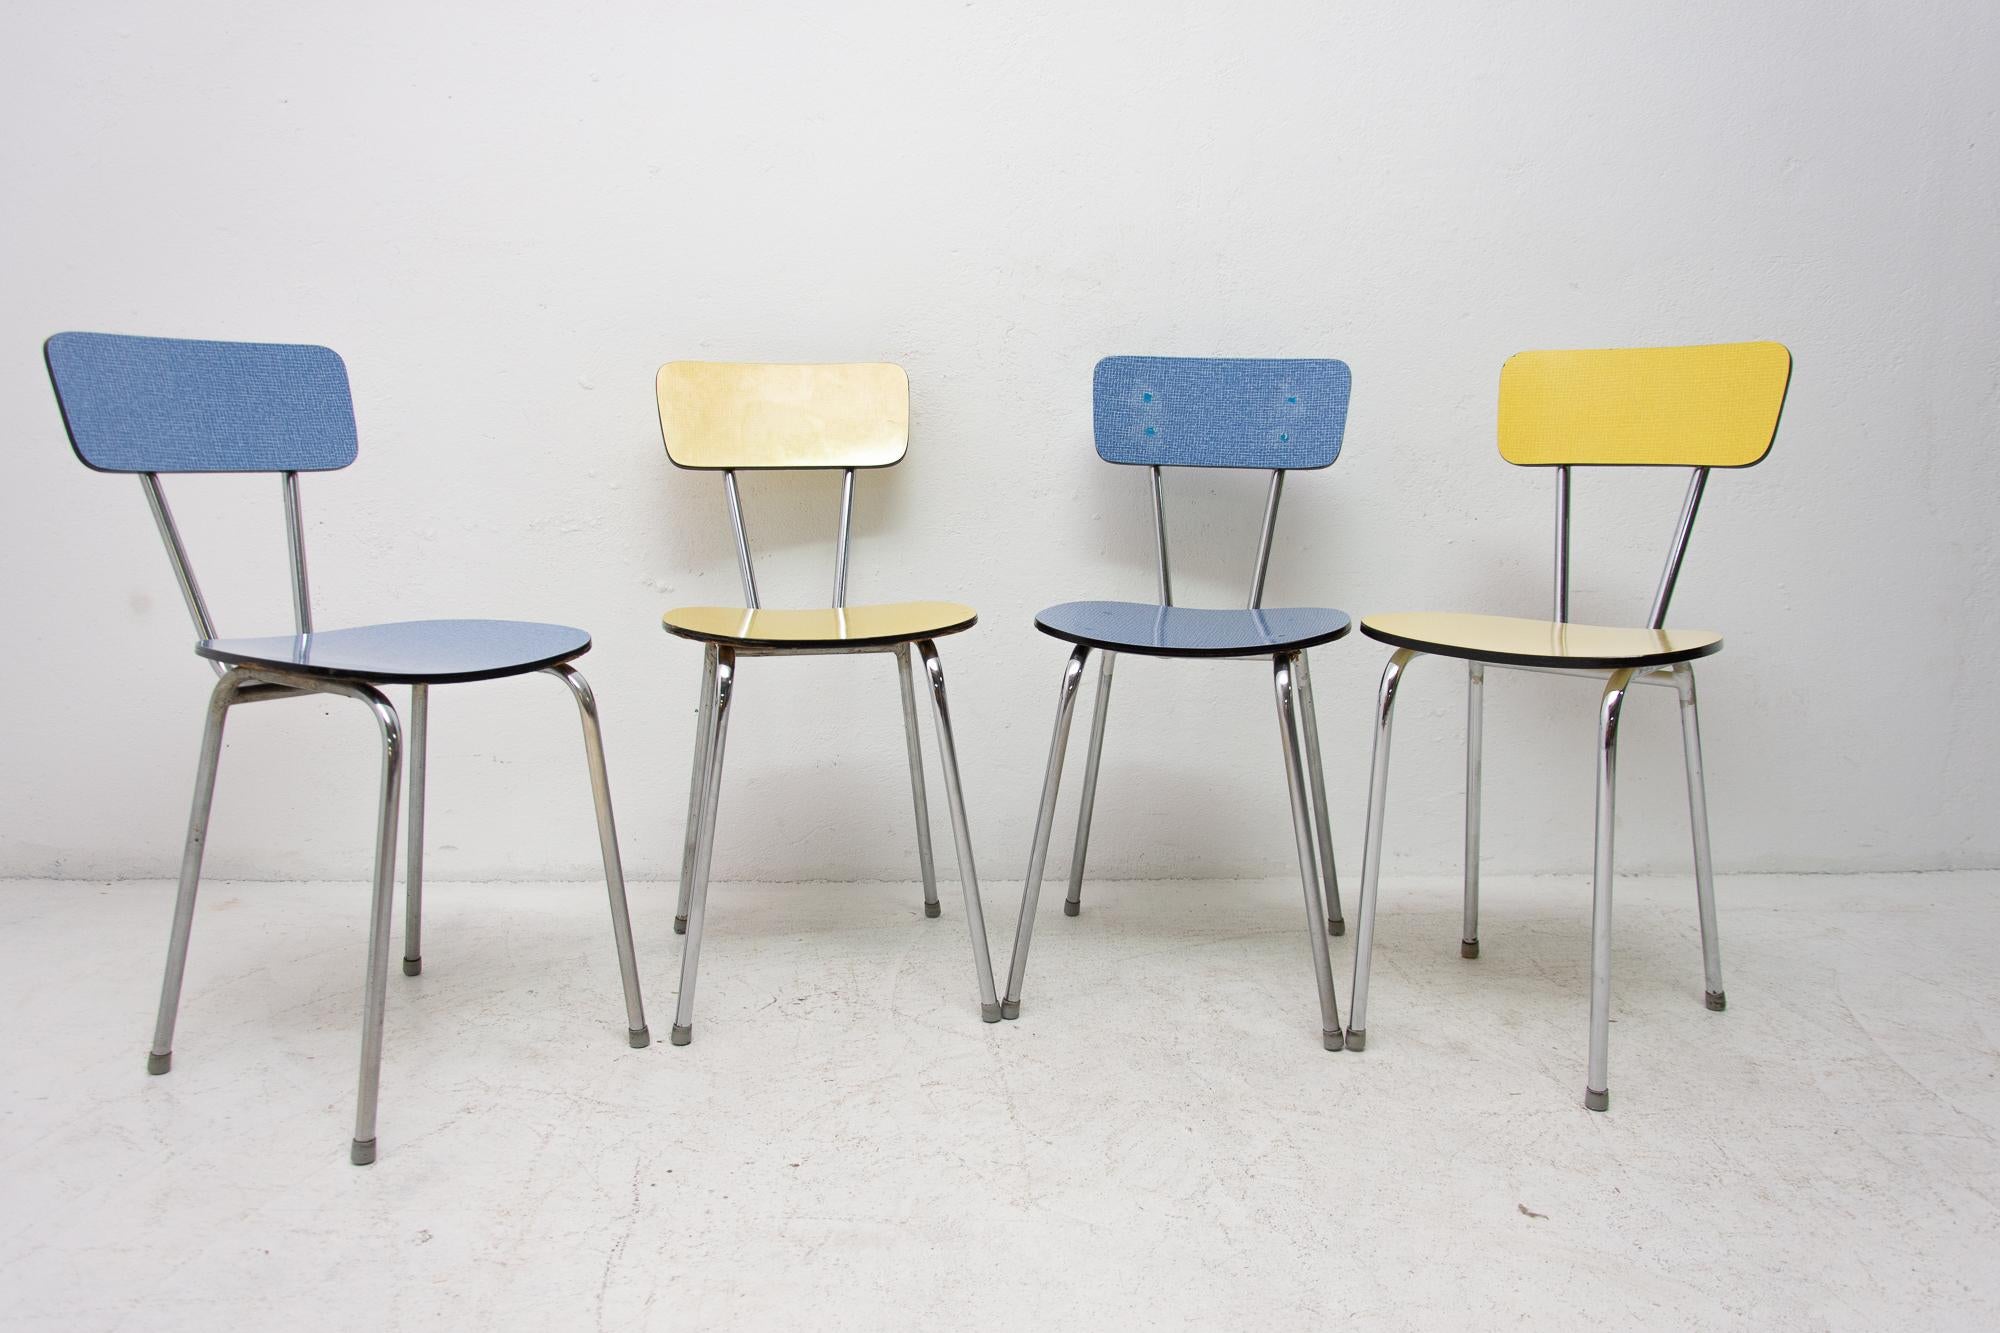 Set of four midcentury color Formica cafe or dining chairs with chrome legs. Made in the 1960s. In very good vintage condition. Price is for the set of four.